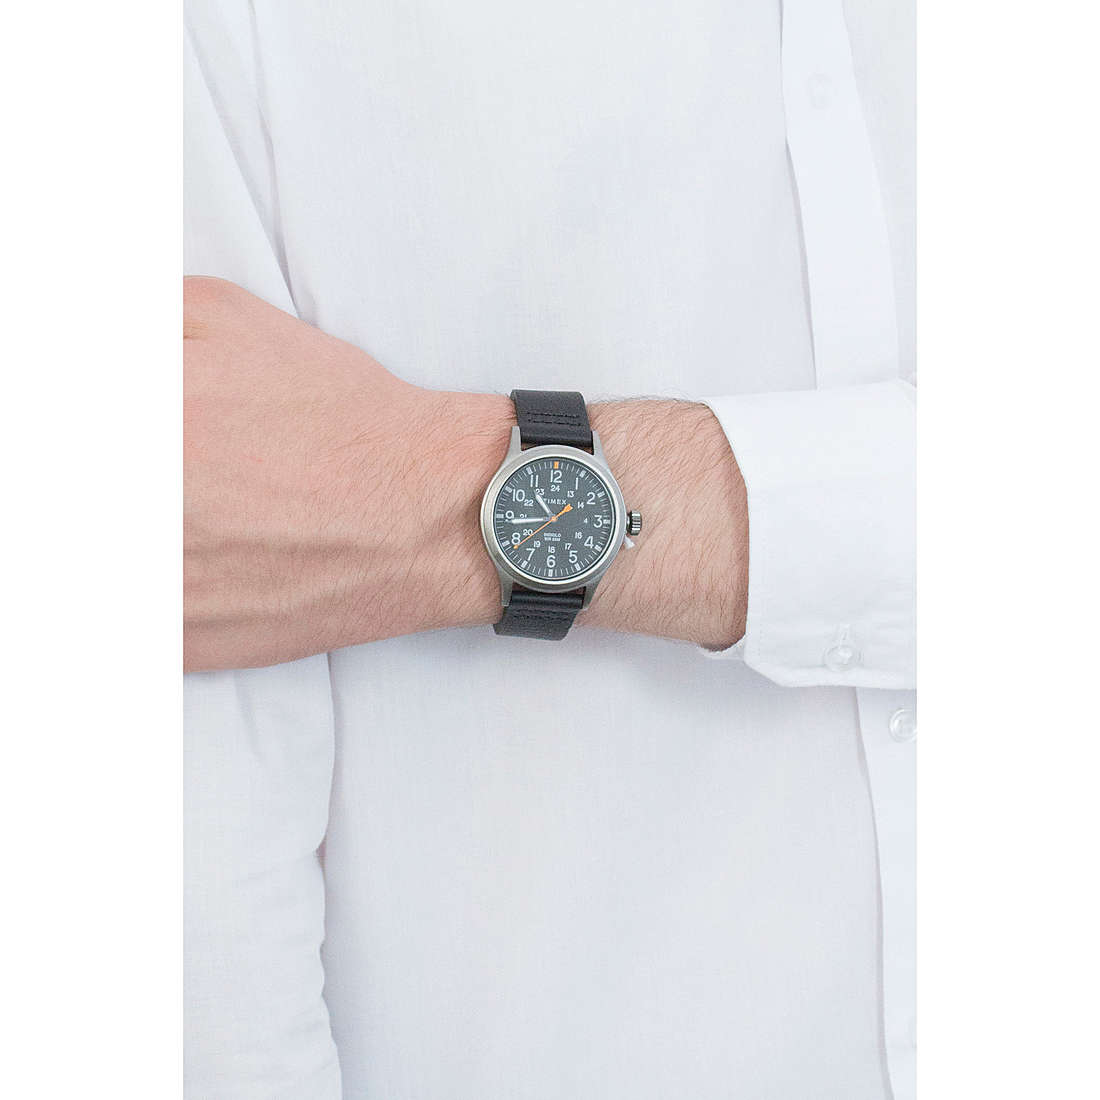 Timex only time Allied man TW2R46500 wearing